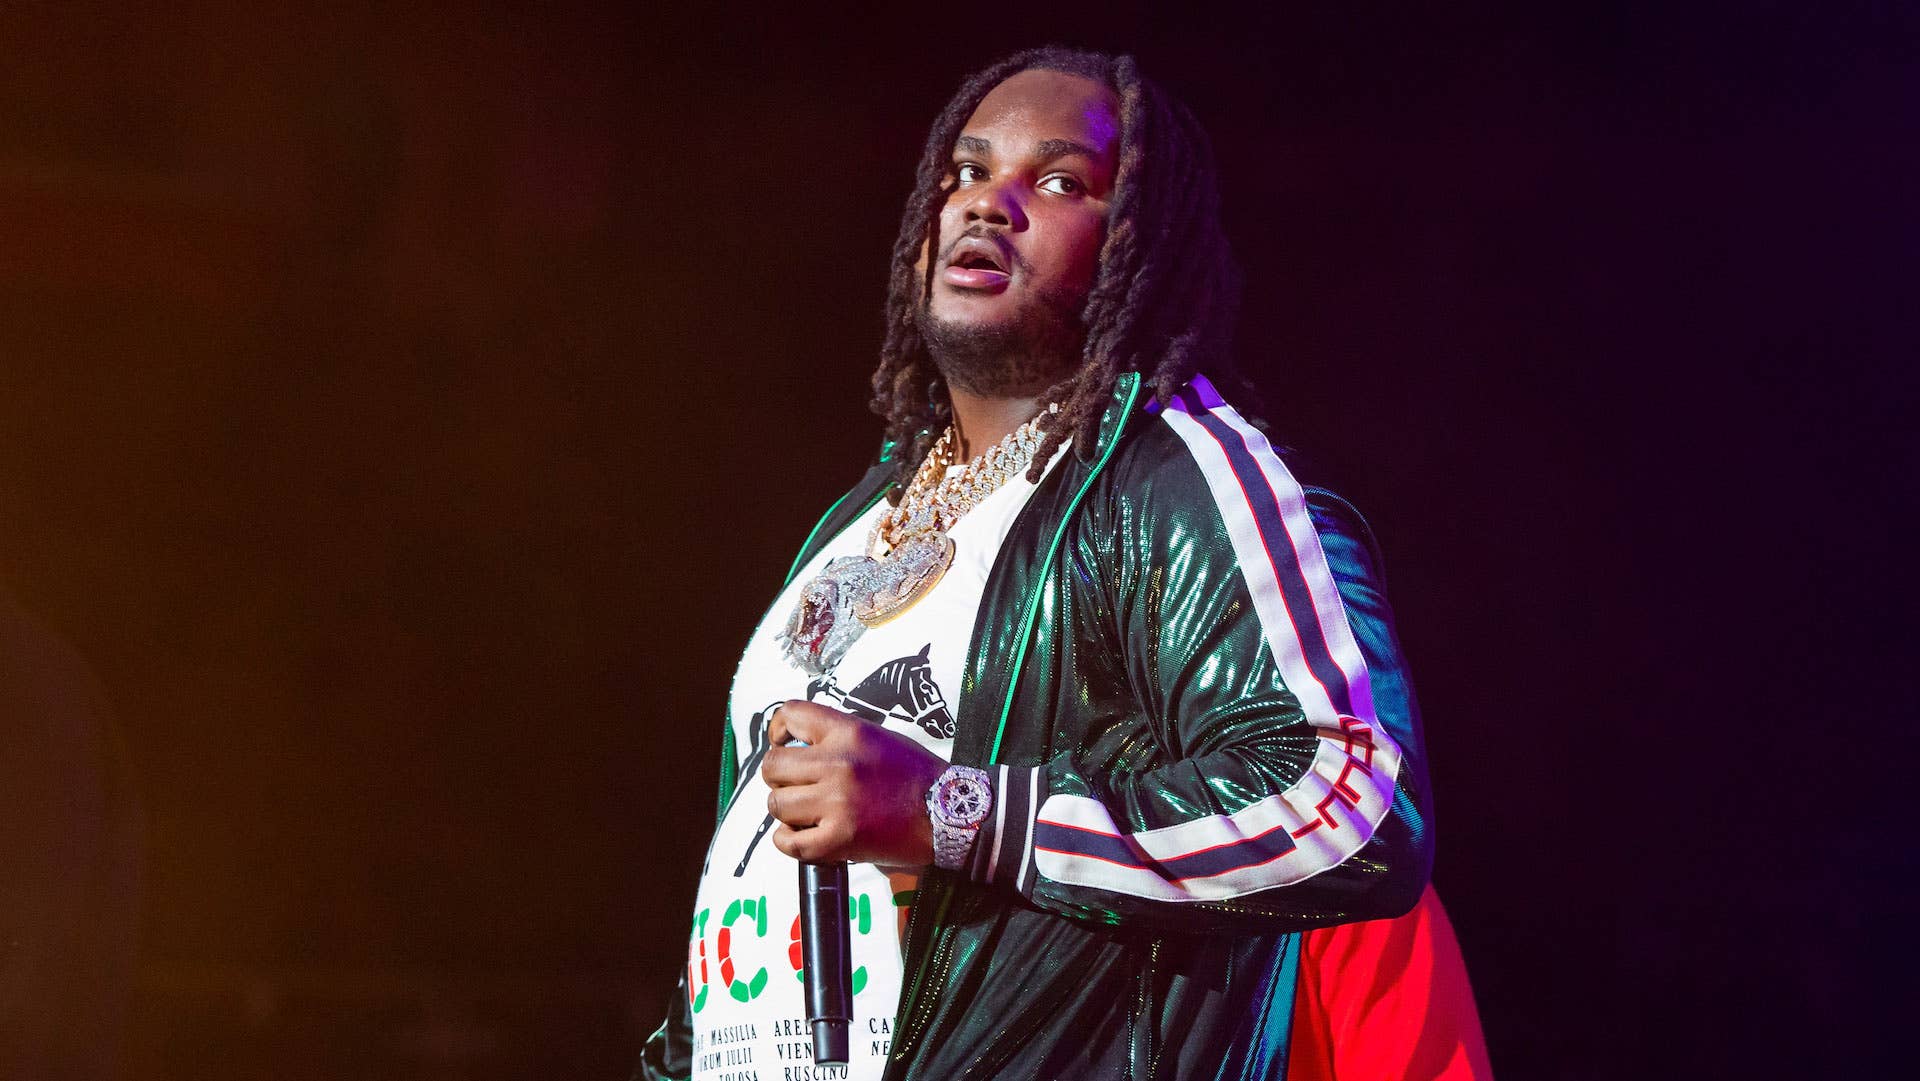 Tee Grizzley performs at WJBL Big Show